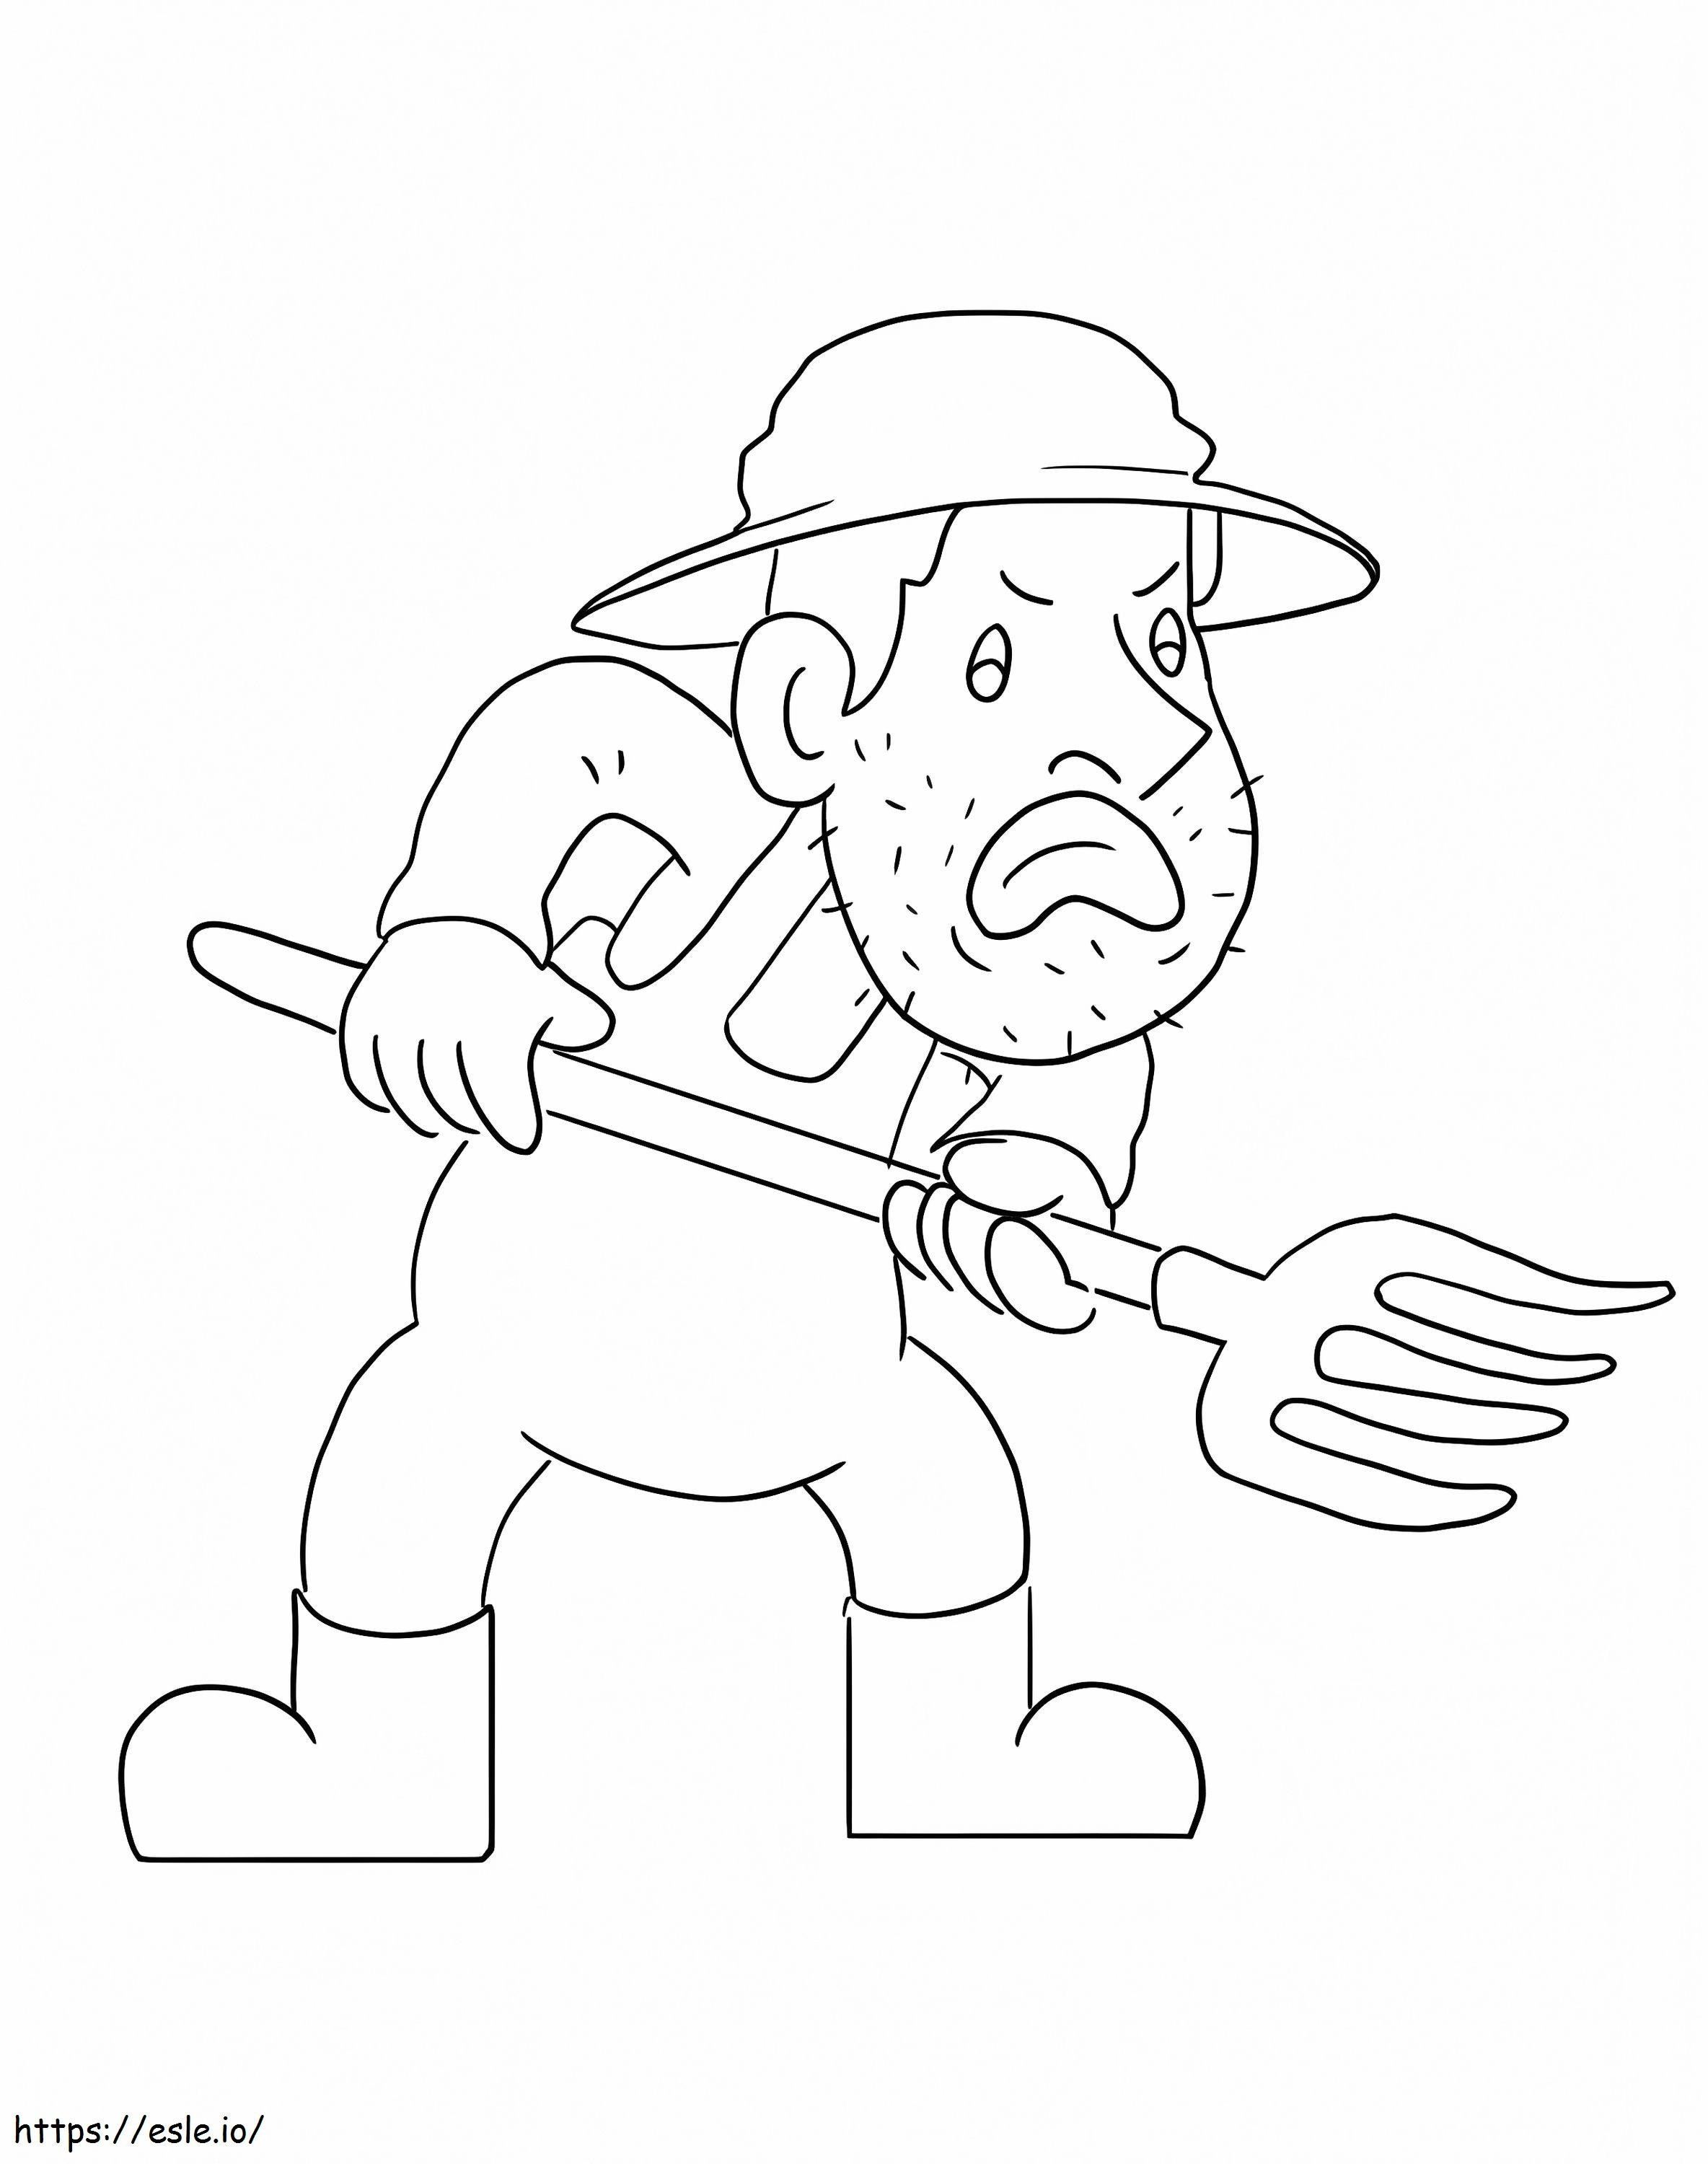 Angry Farmer coloring page